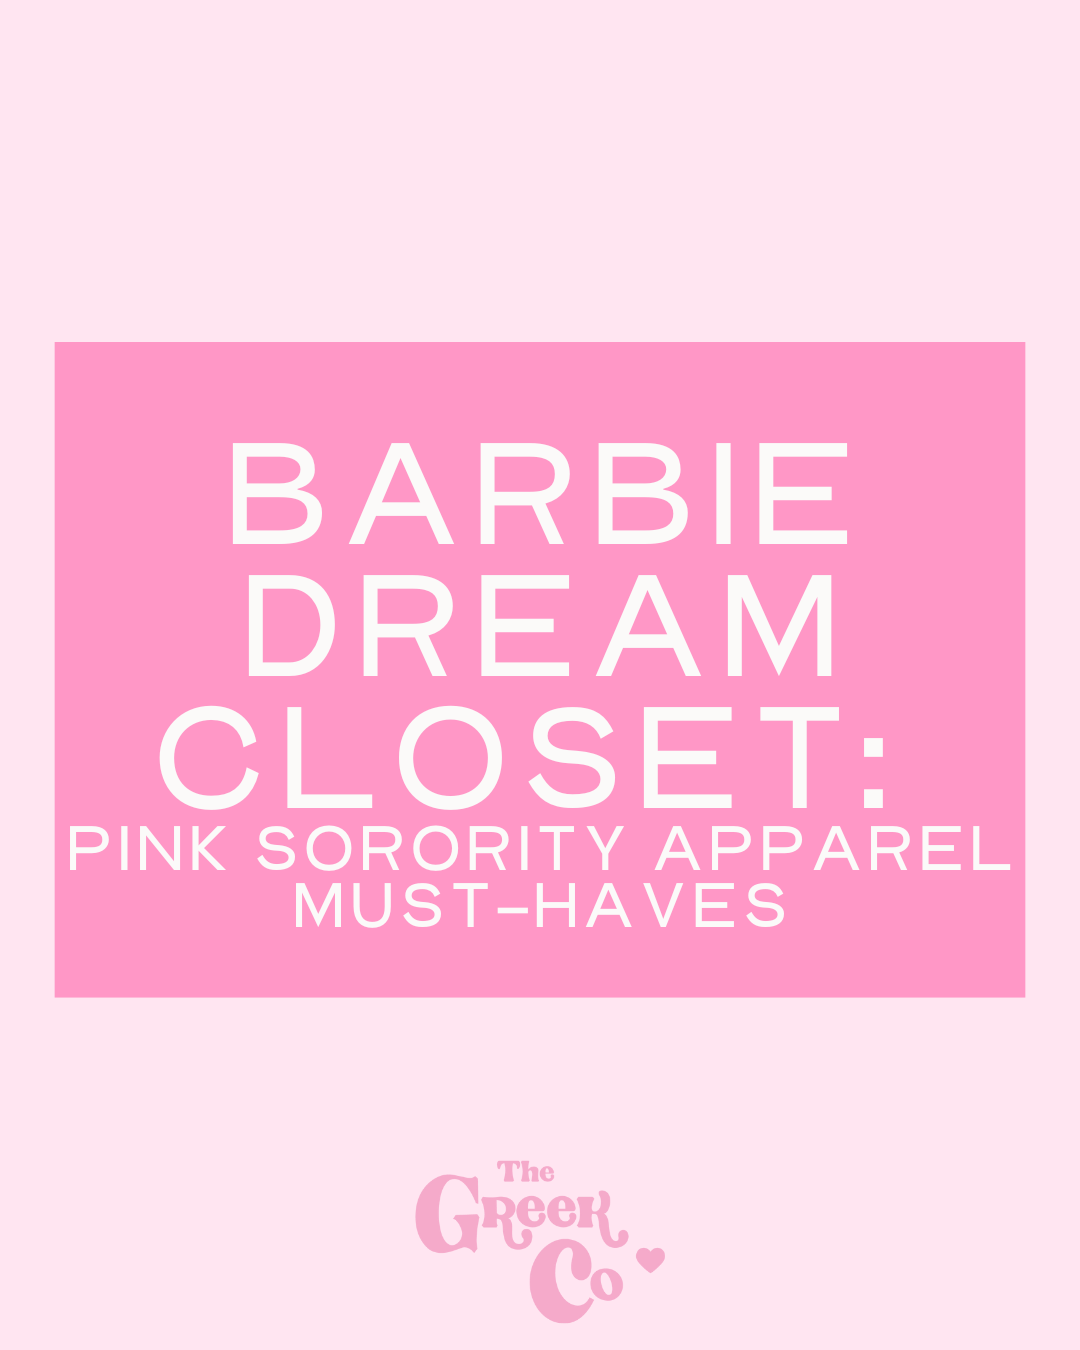 Step into the Barbie Dream Closet: Must-Have Pink Sorority Apparel